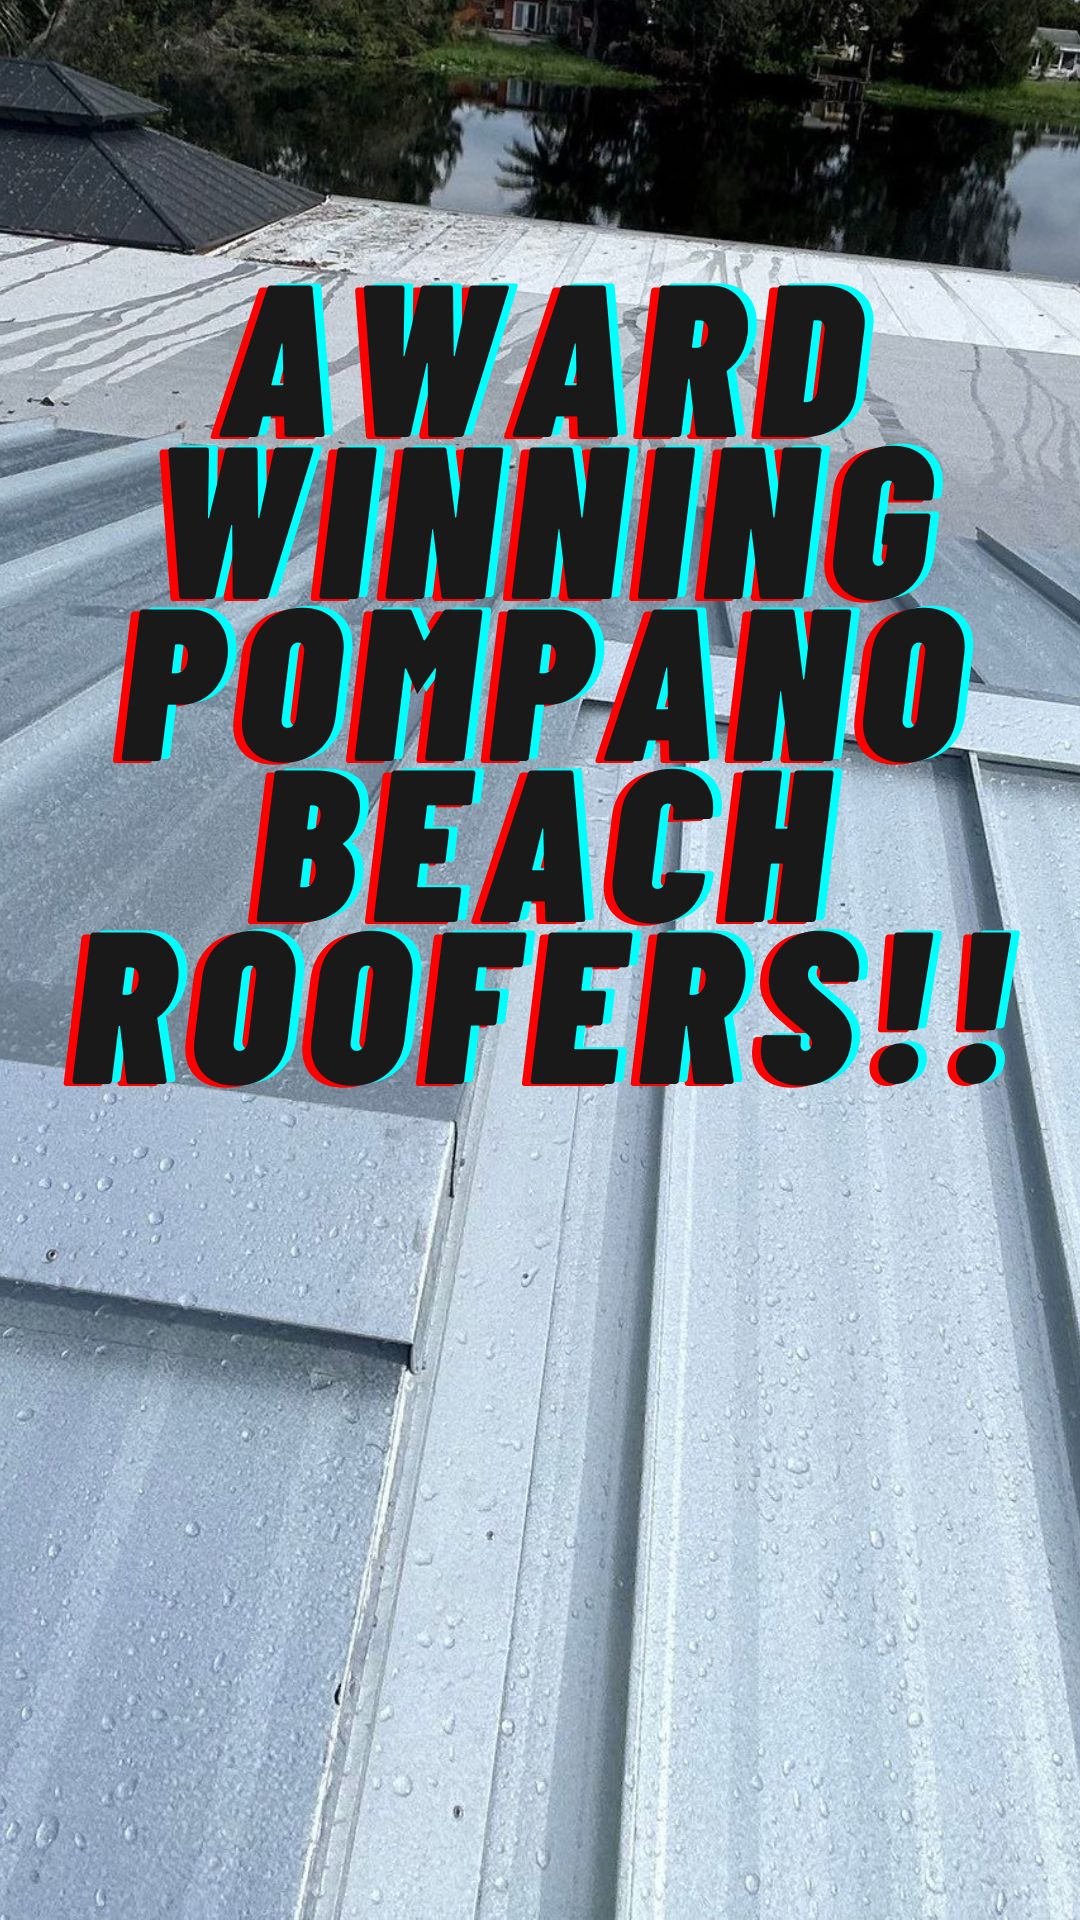 Elite Seal Roofing Inc Crowned "Best Roofing Contractors In Pompano Beach" By Roofers Near You